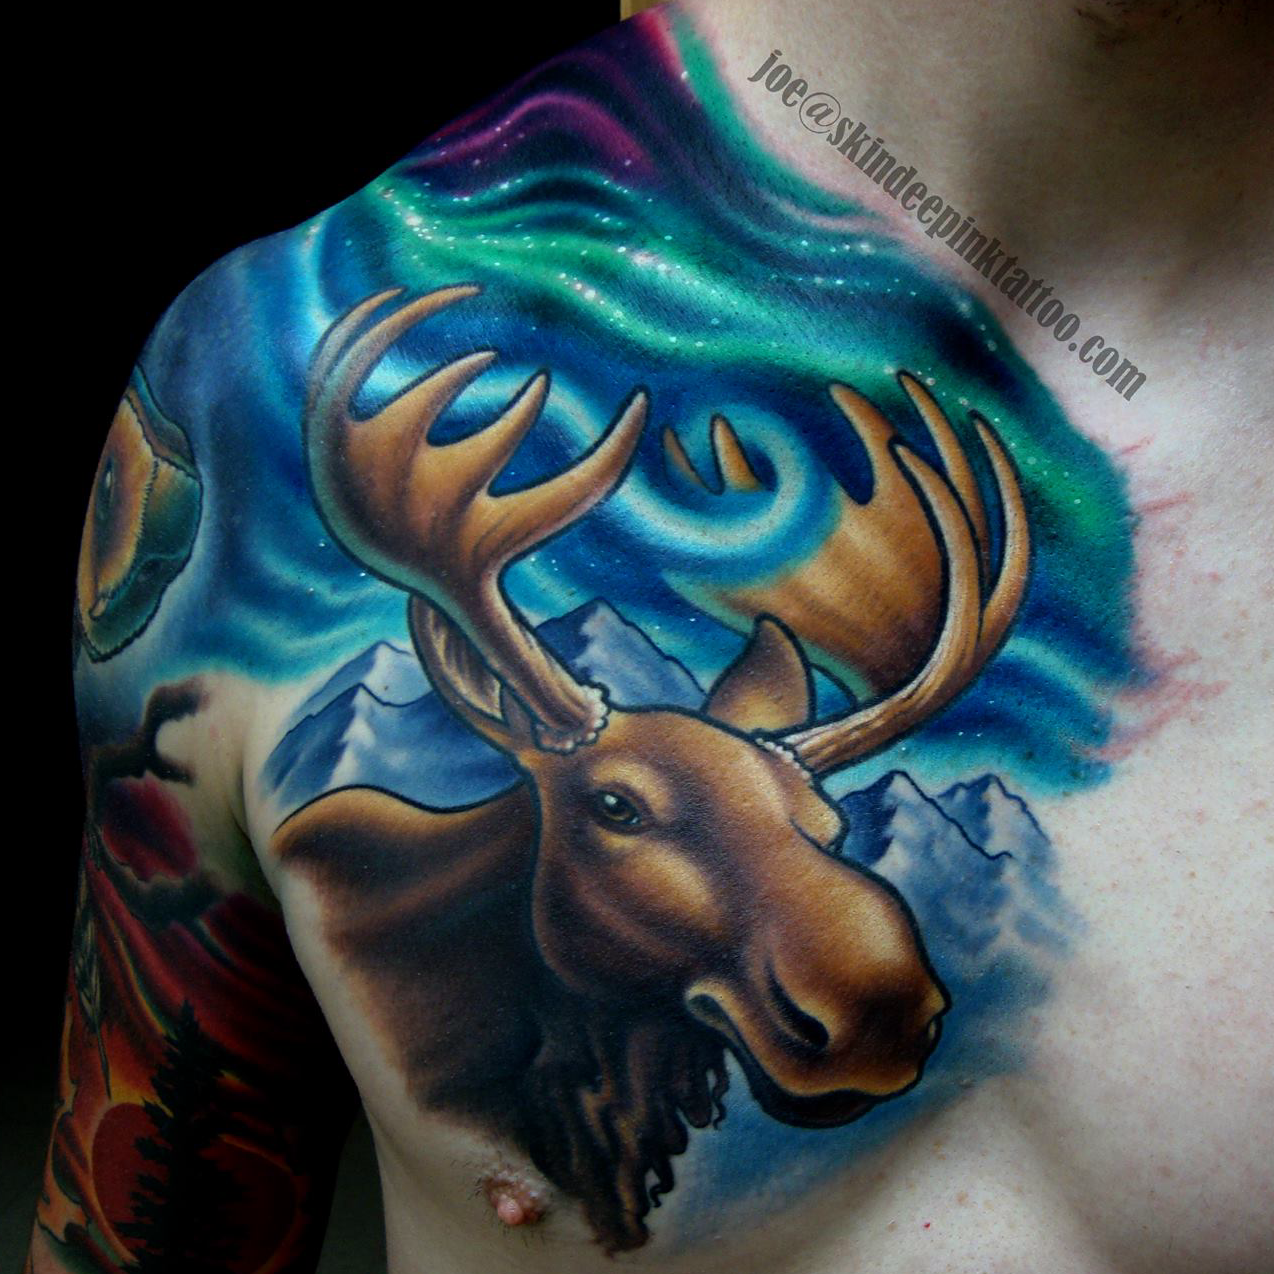 Moose and Galaxy Tattoo done by Cracker Joe Swider in CT